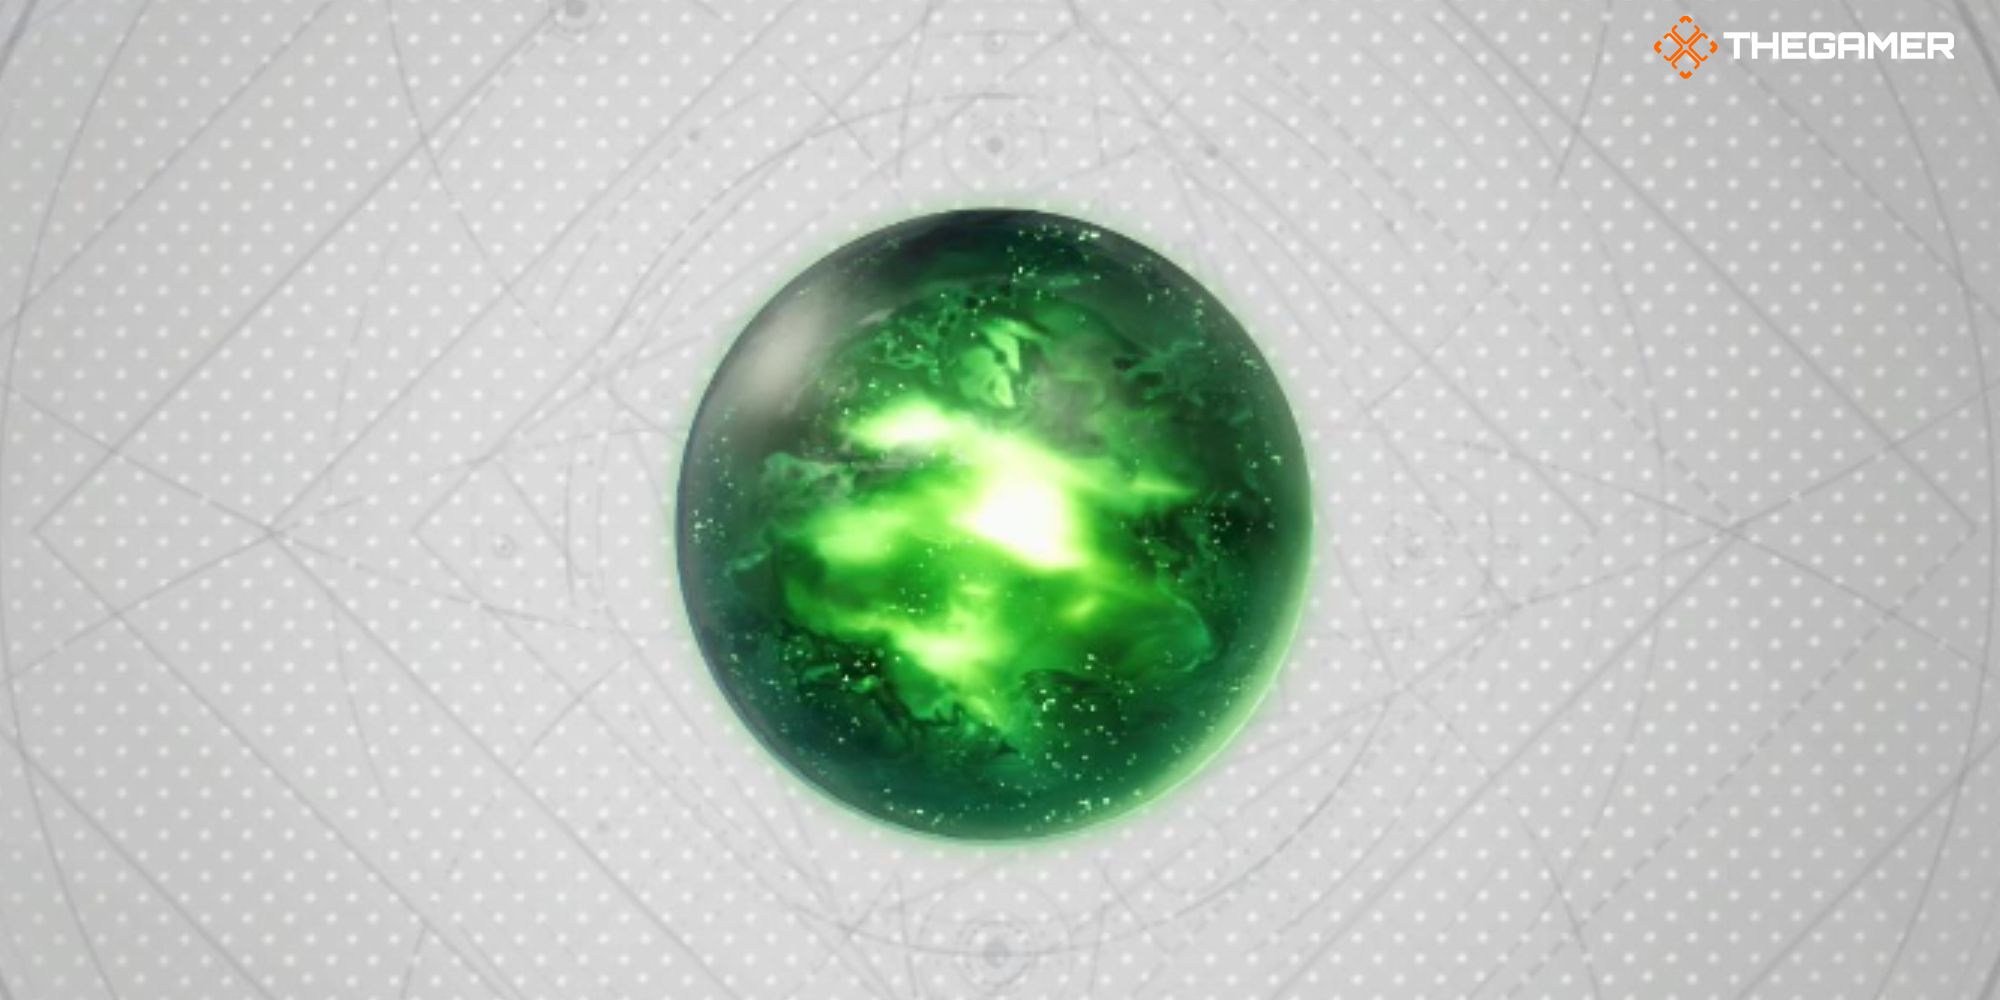 The Comet Materia in Final Fantasy 7 Rebirth as seen within the game's main menu screen